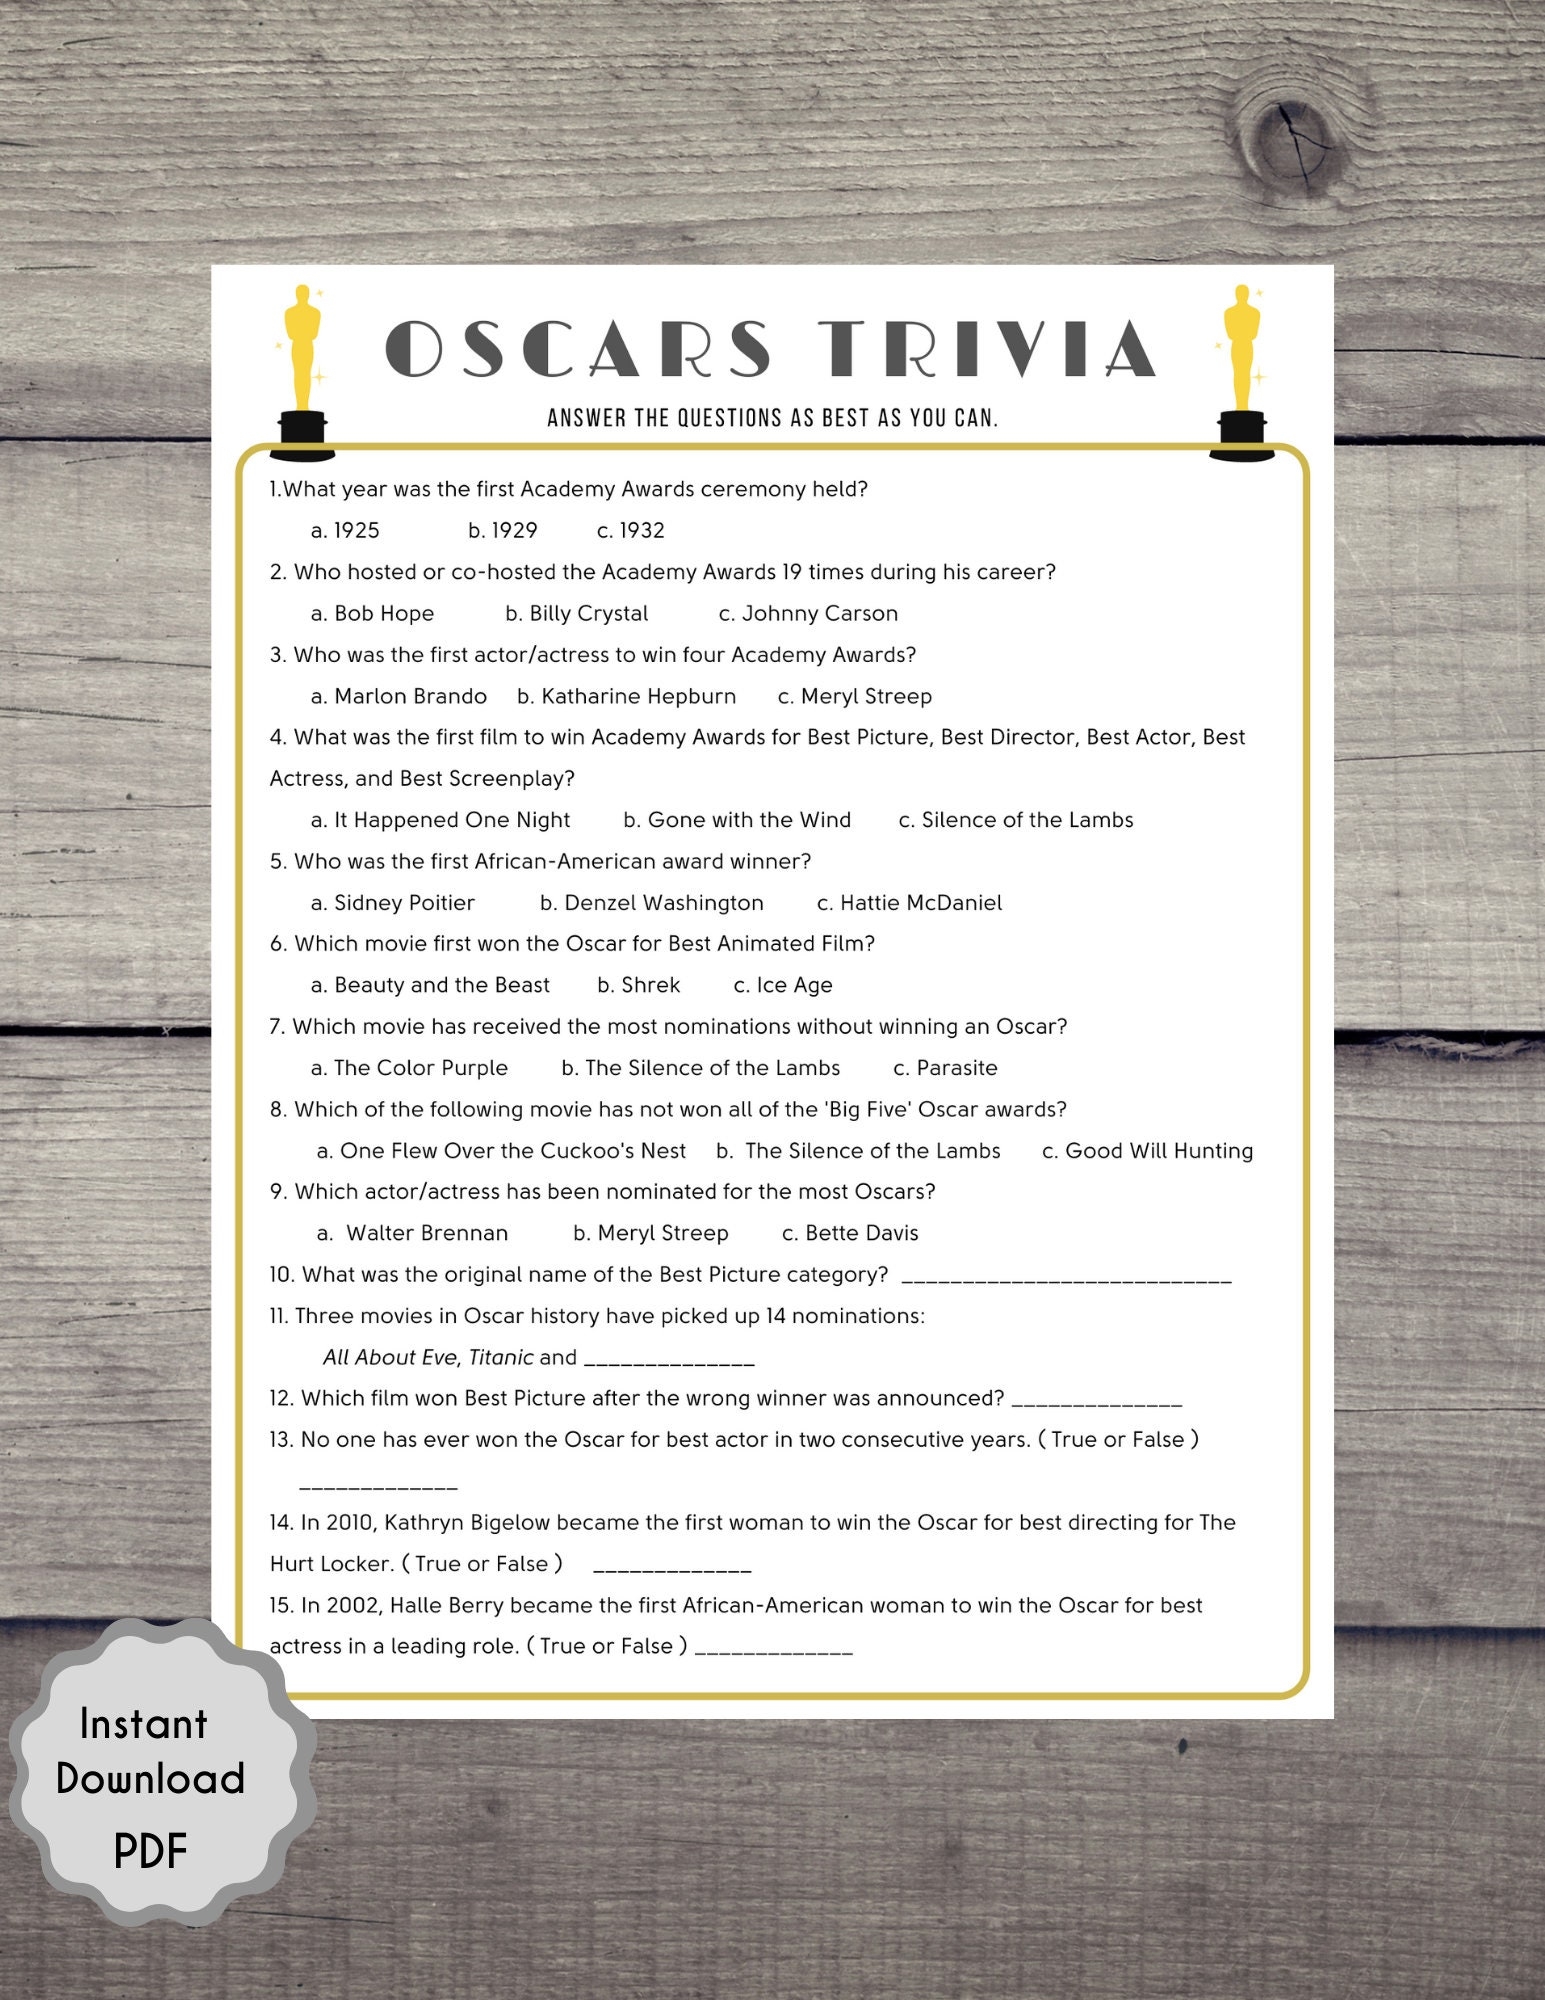 Oscars Trivia Game 95th Academy Awards Printable Game Oscars 2023 Printable Movie Awards Trivia Instant Download PDF Game All Ages Etsy